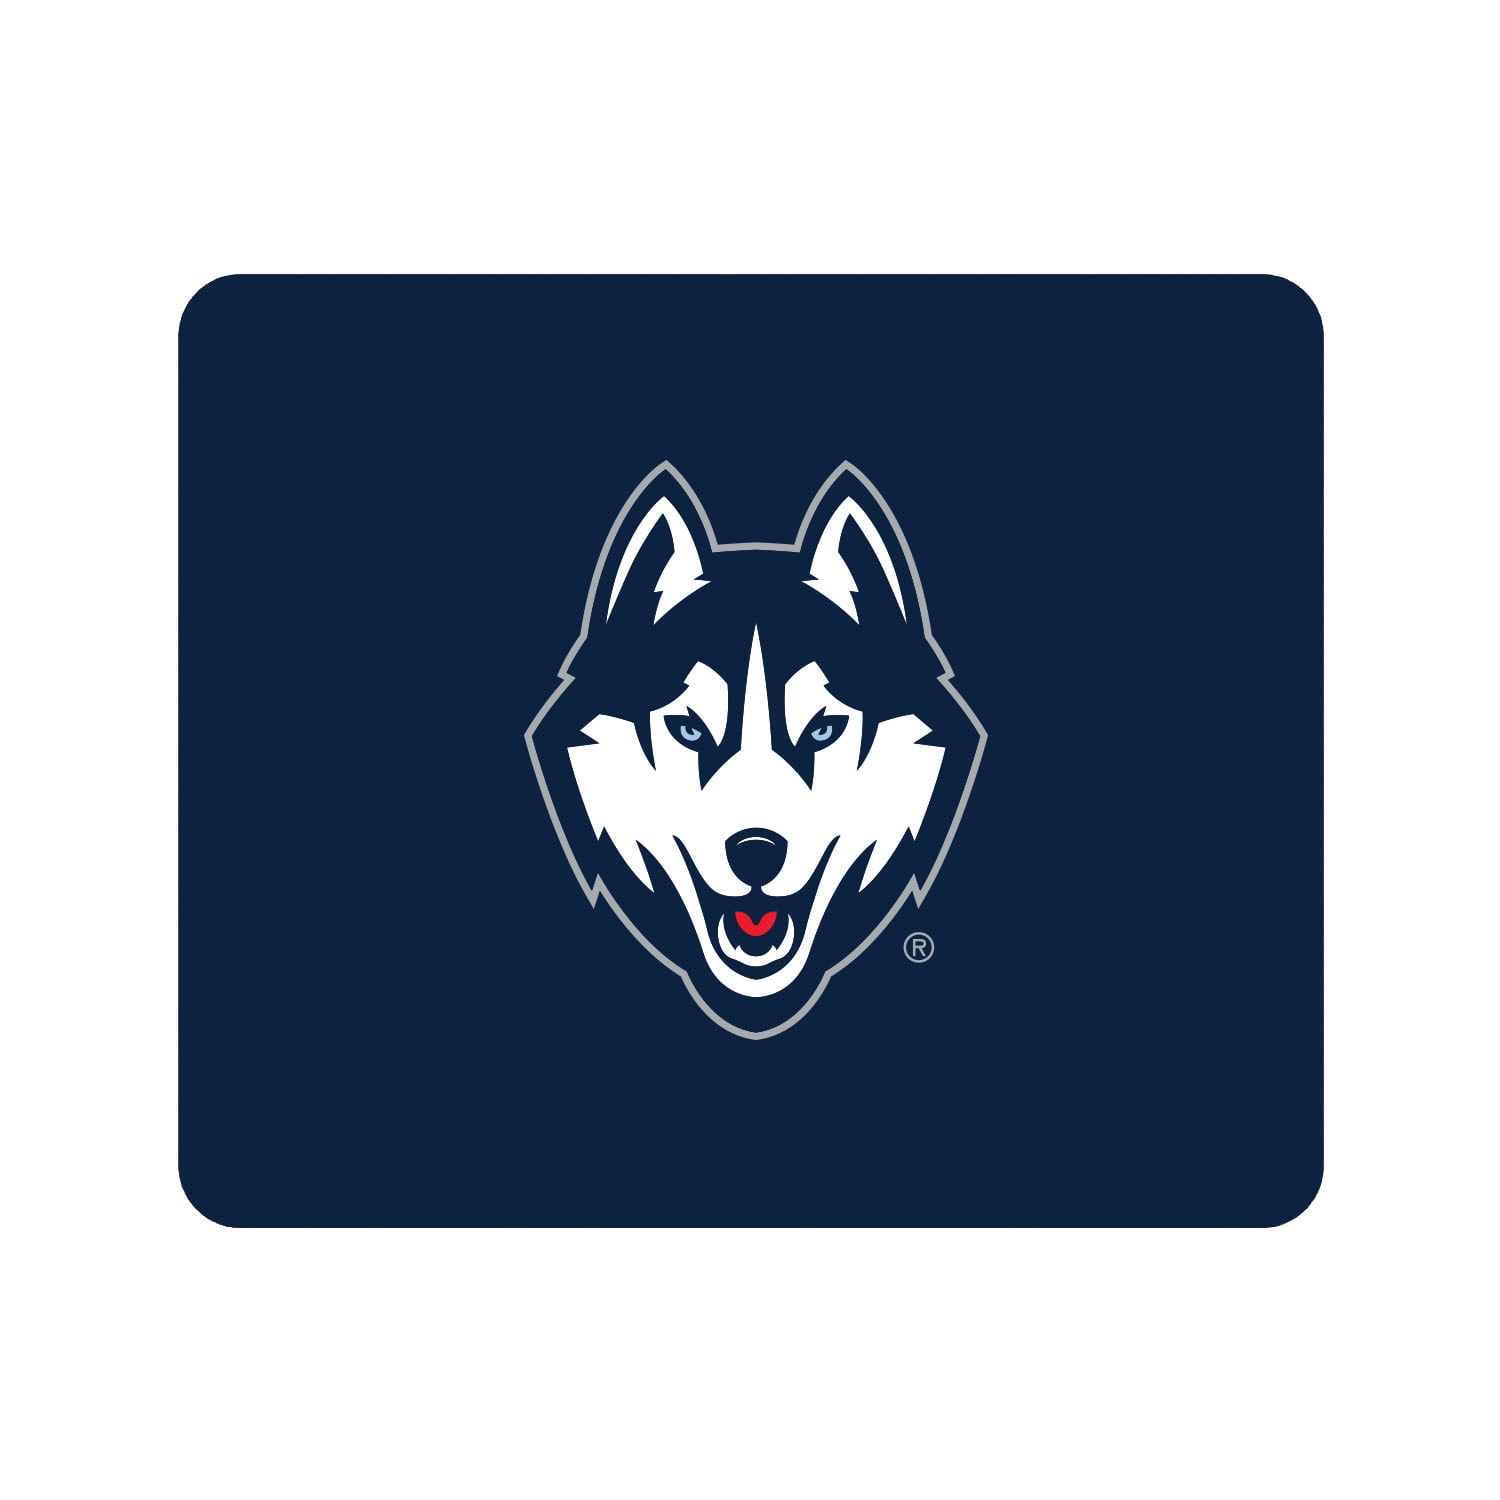 OTM Essentials Officially Licensed University of Connecticut Huskies Mouse Pad Non-Slip Rubber Base Triple Wordmark 